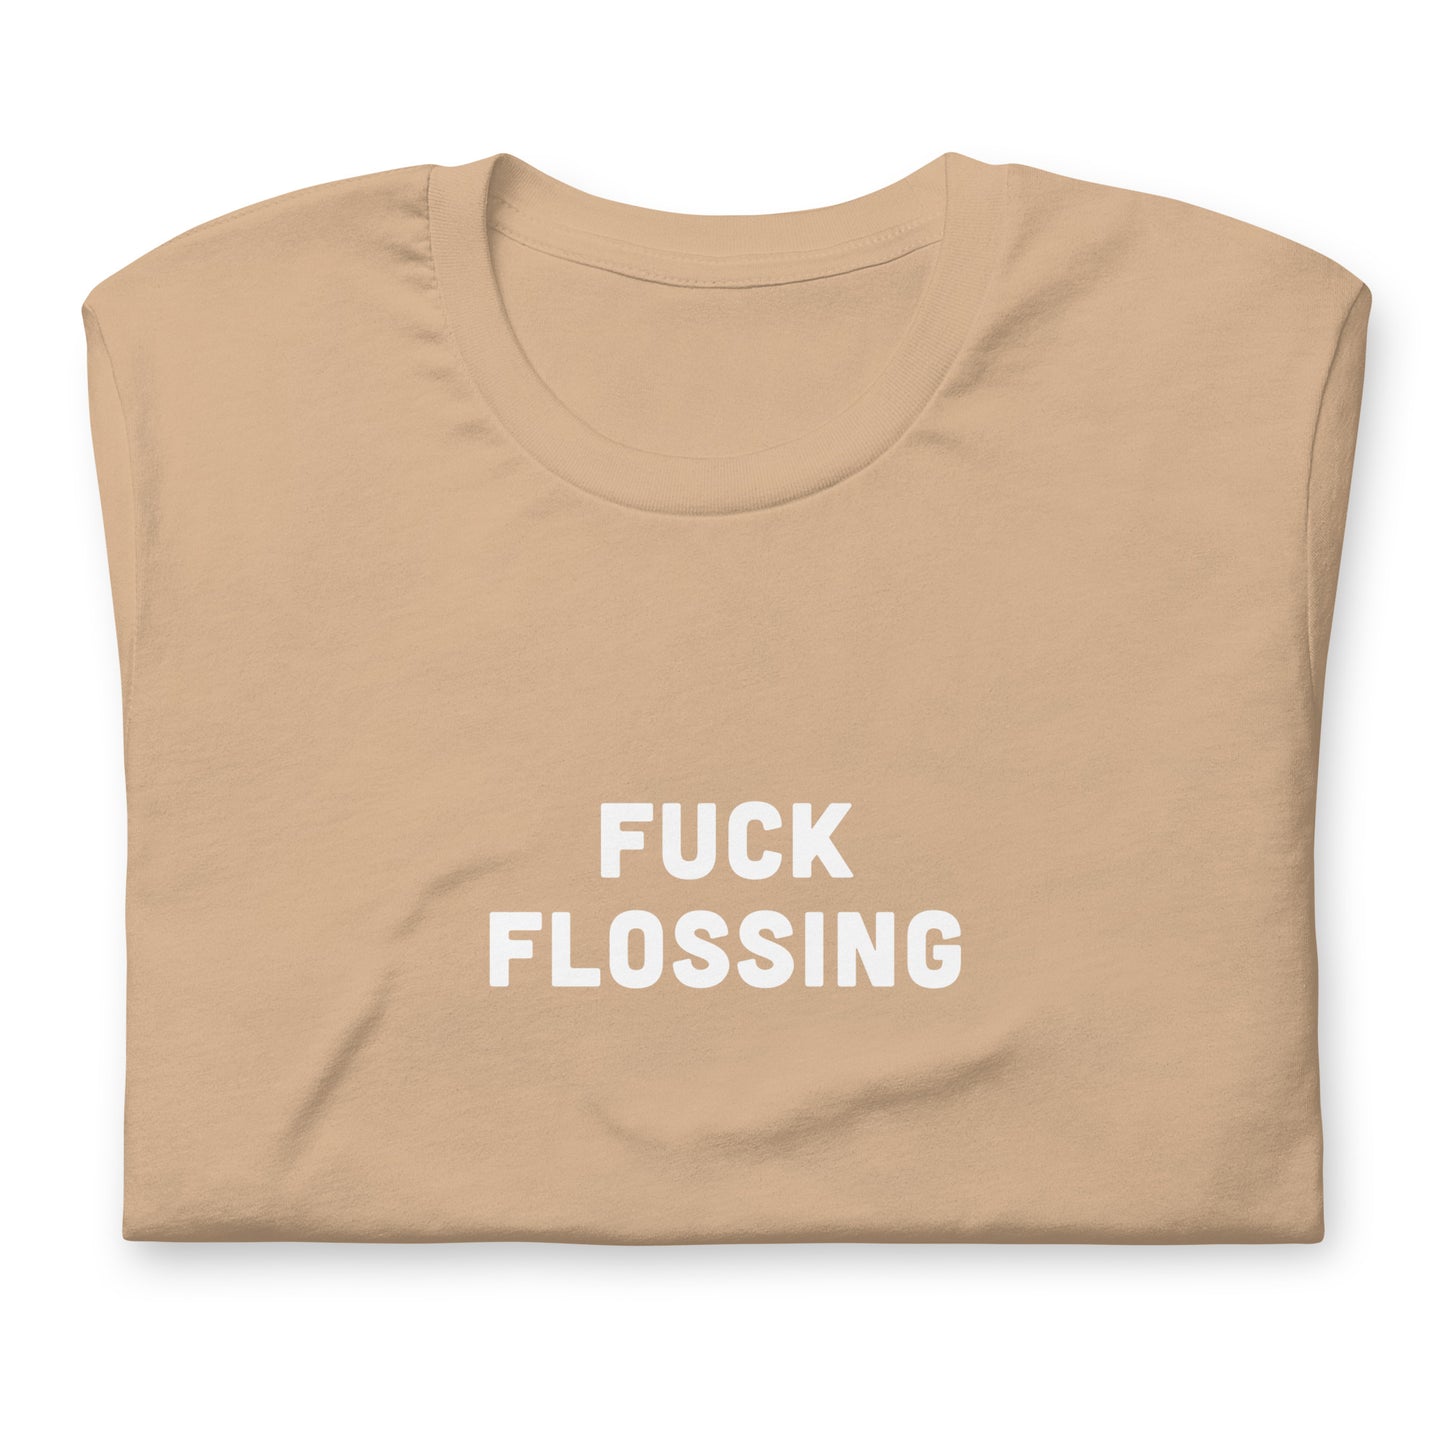 Fuck Flossing T-Shirt Size XL Color Forest